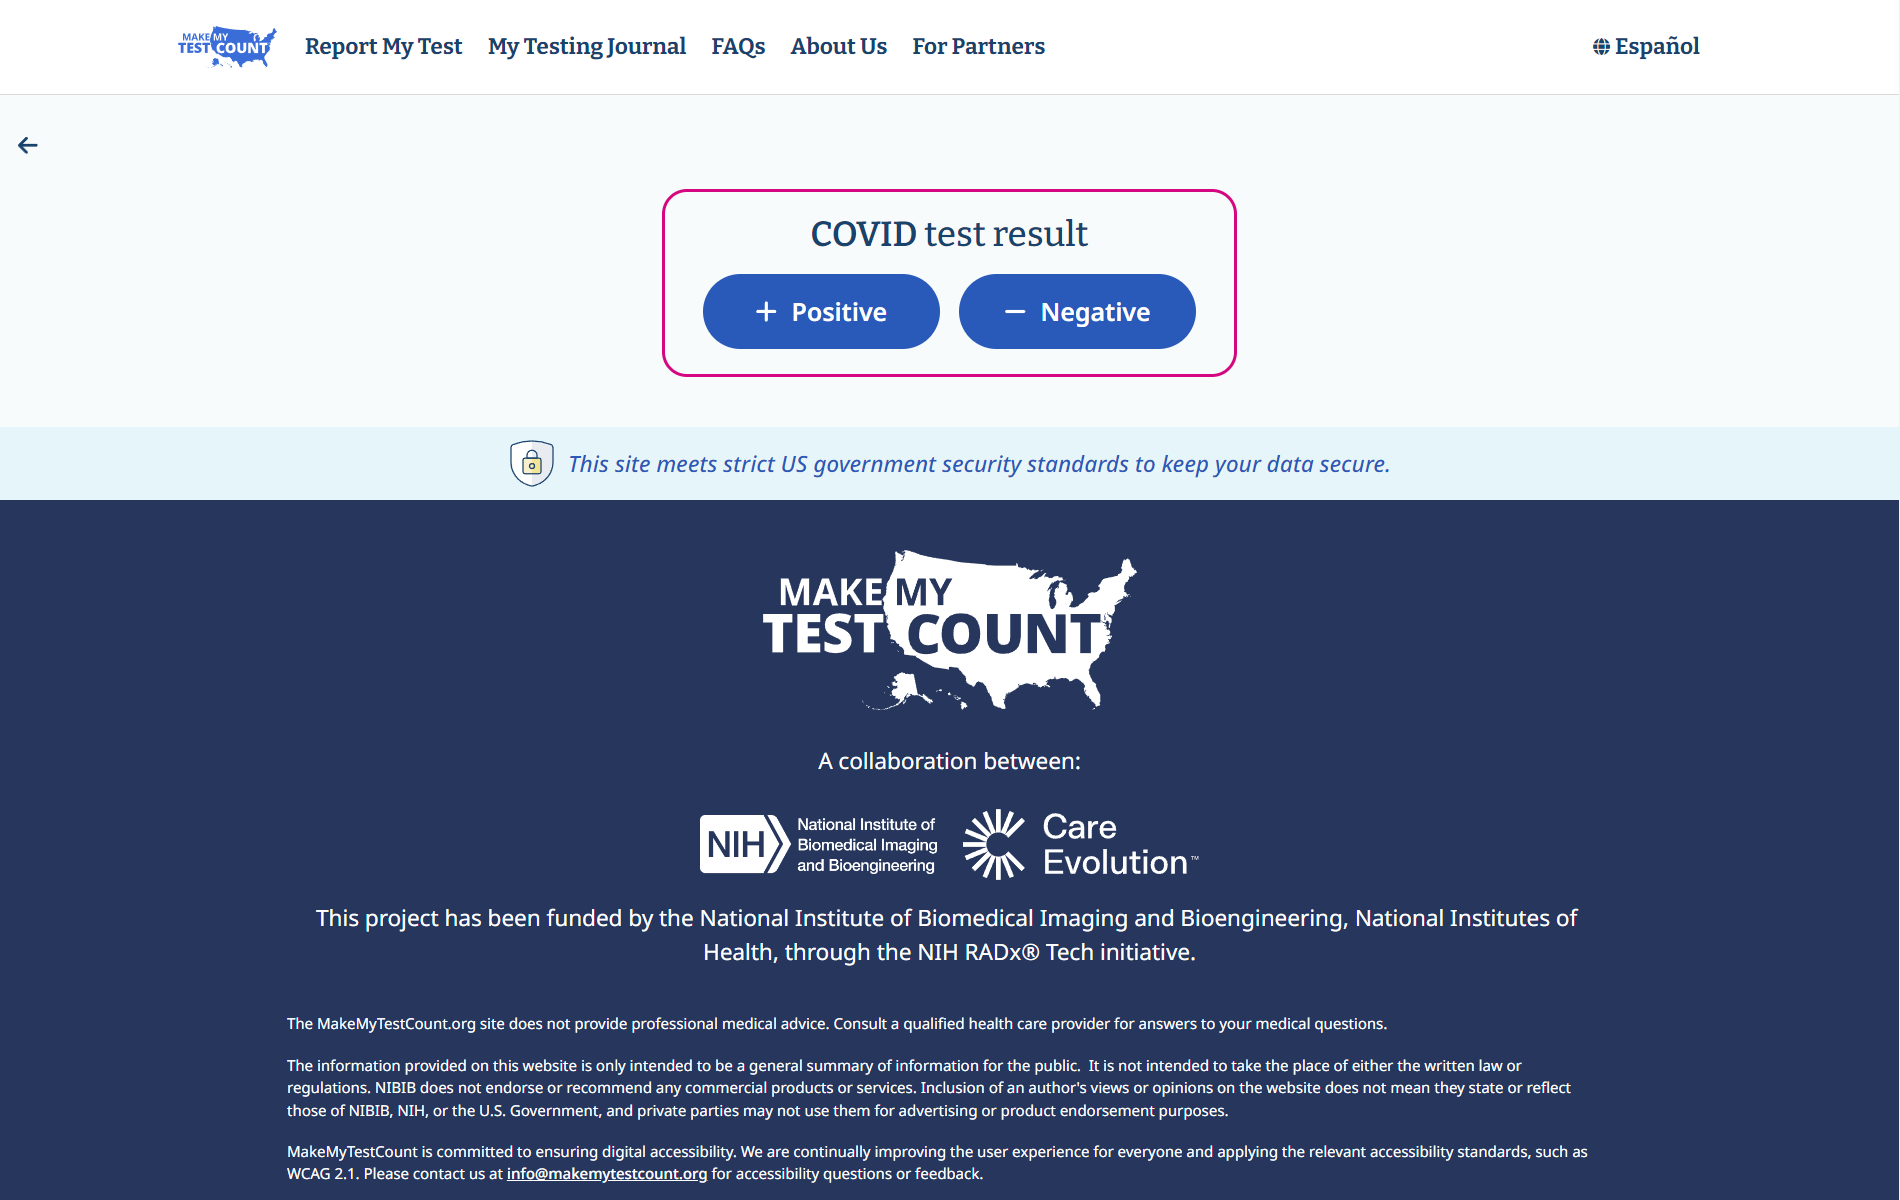 Screenshot of MakeMyTestCount.org page on which user reports the result of their at-home COVID test.